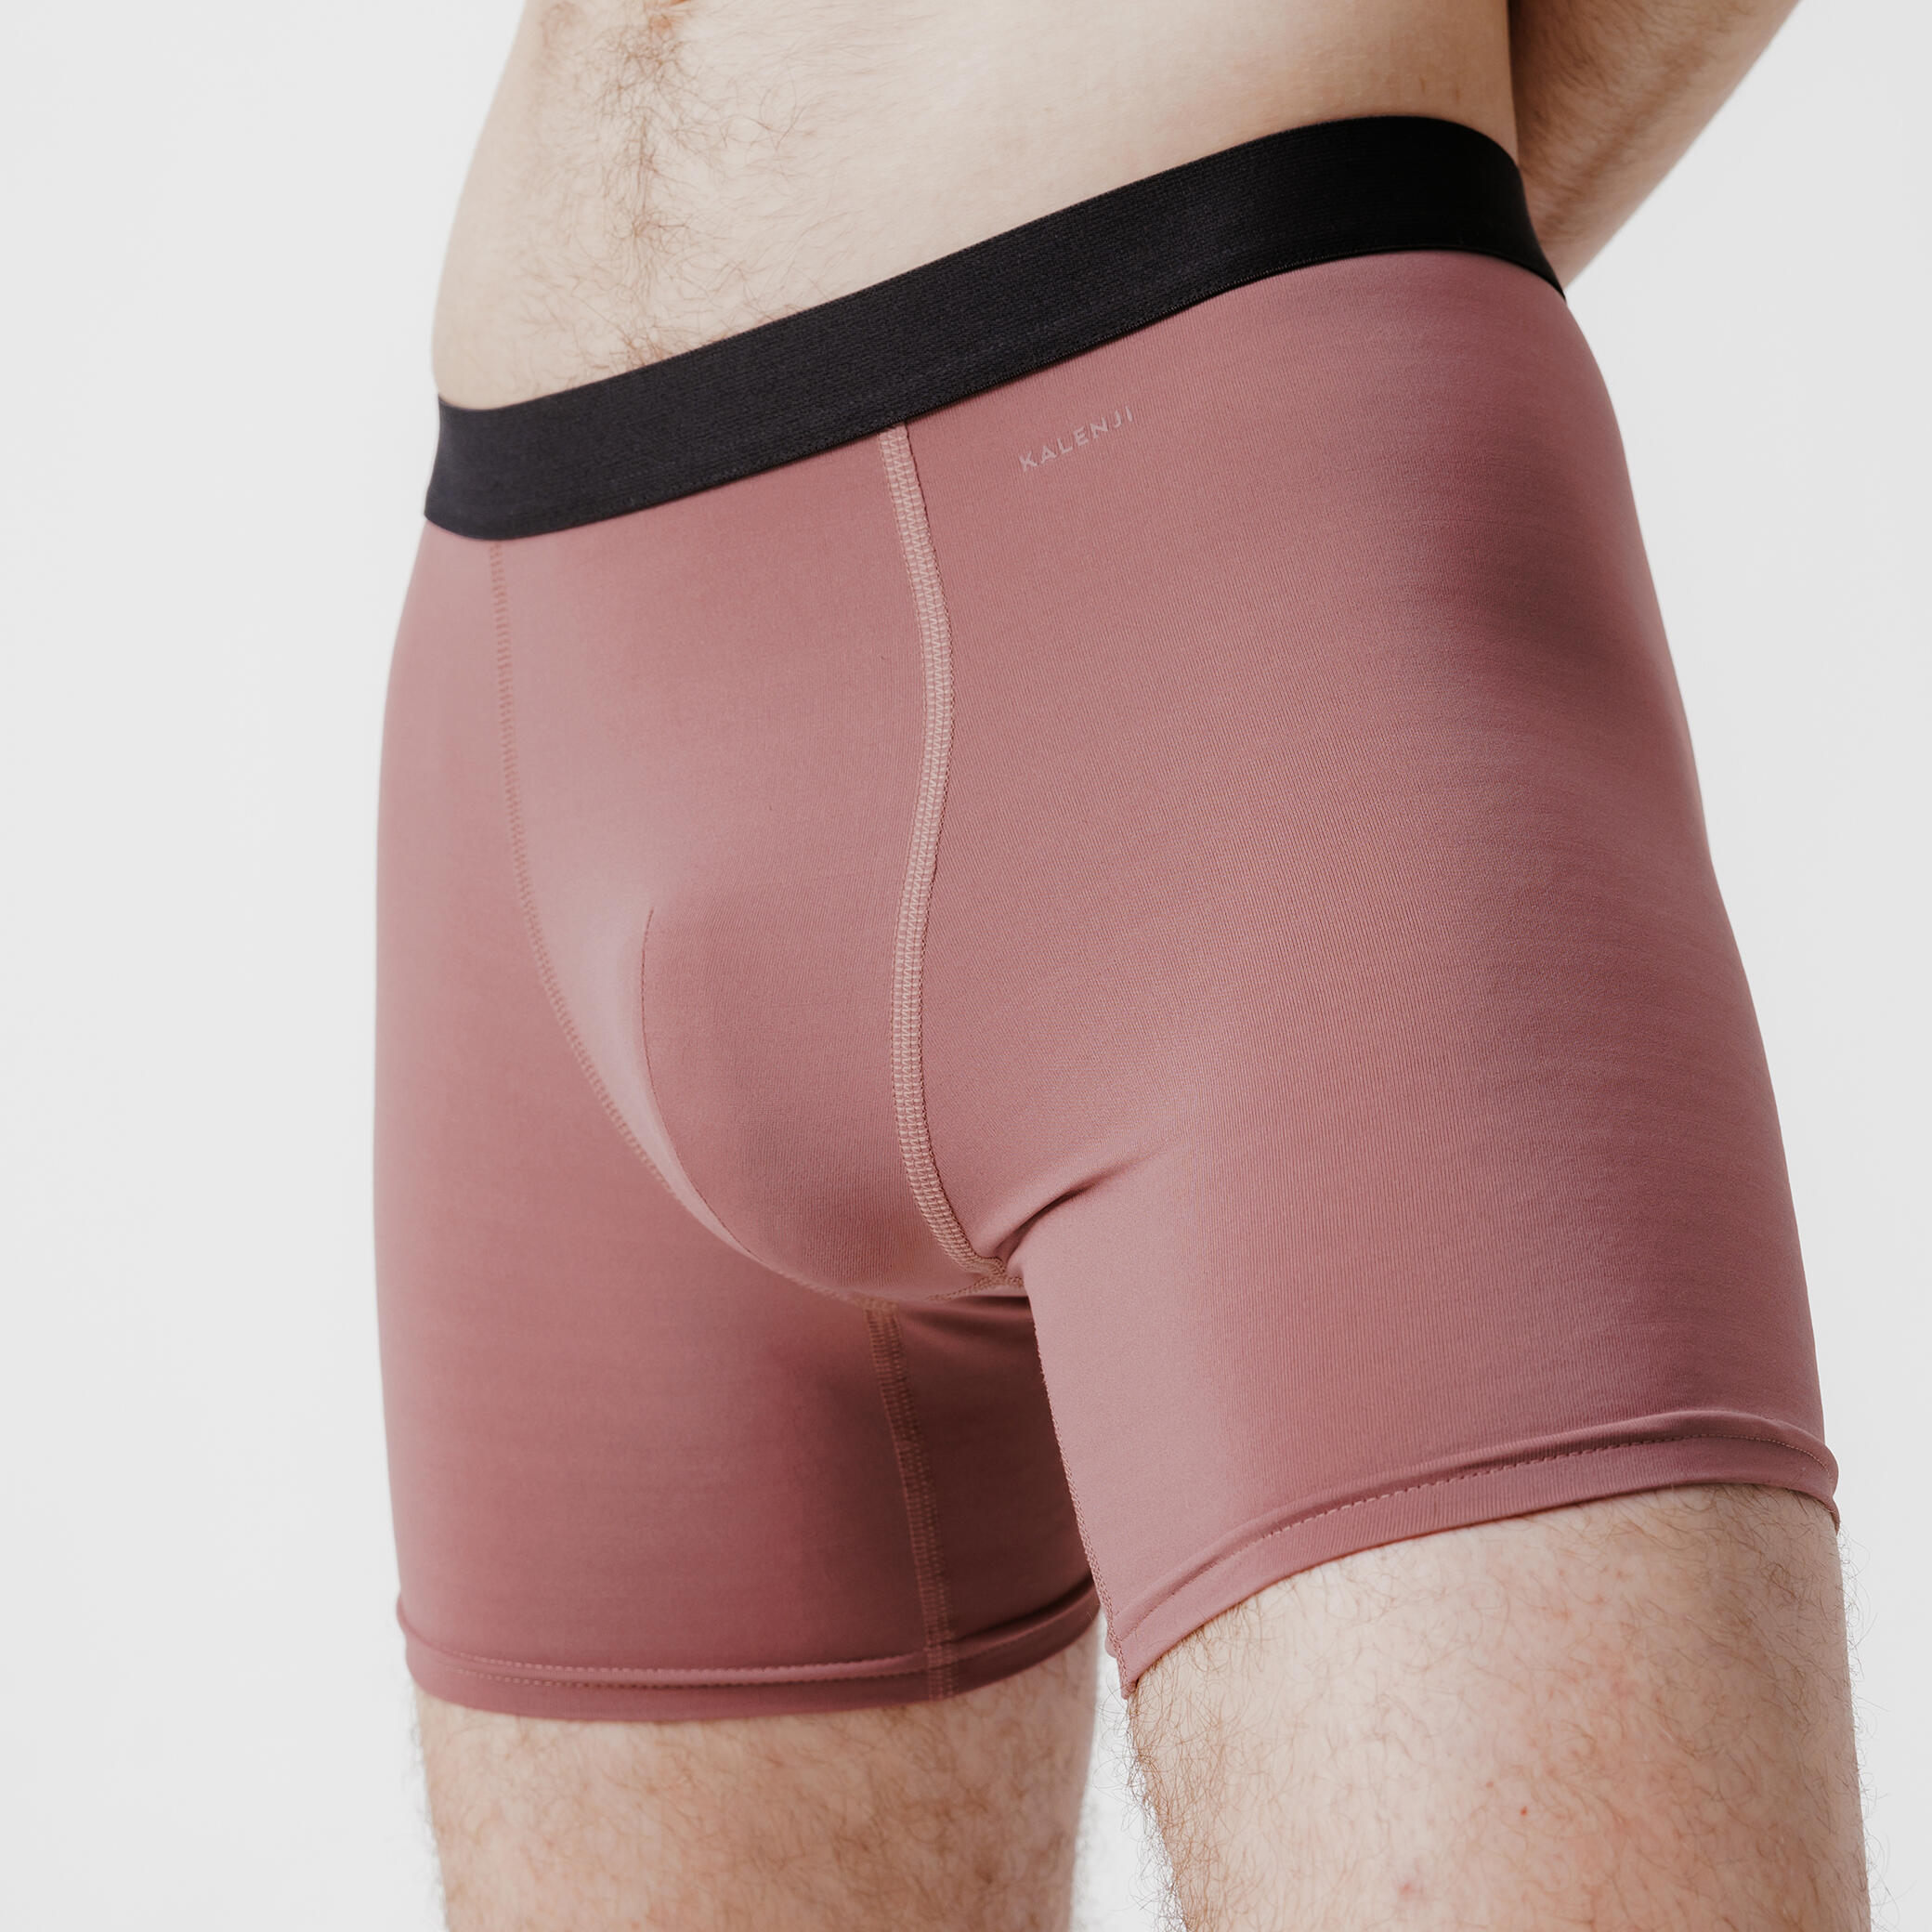 Men's breathable microfibre boxers - Taupe pink 5/7